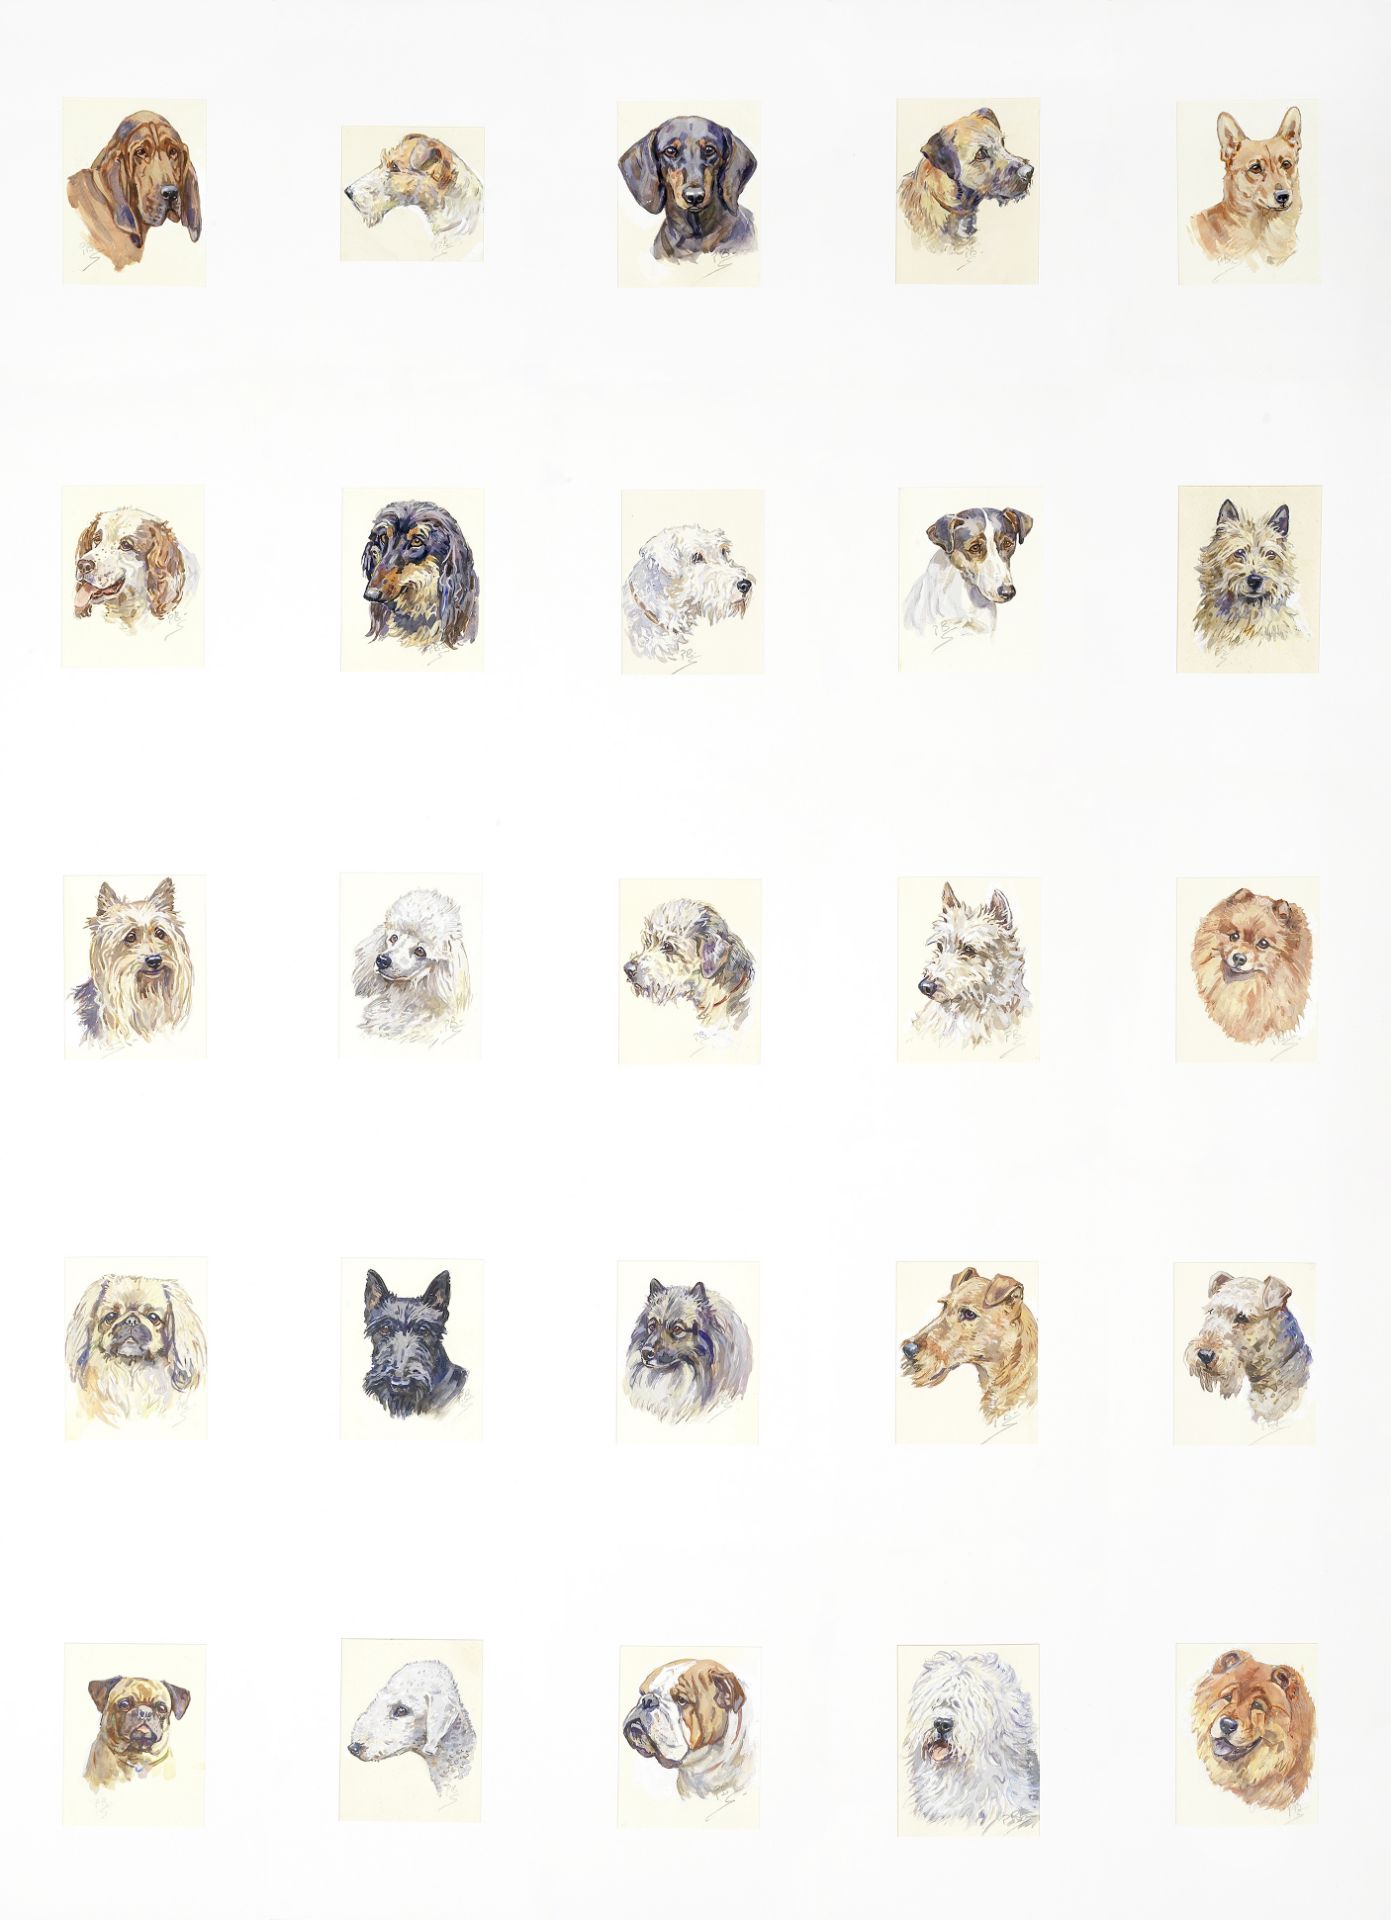 Peter Biegel (British, 1913-1987) A collection of dog studies (25) all mounted but unframed